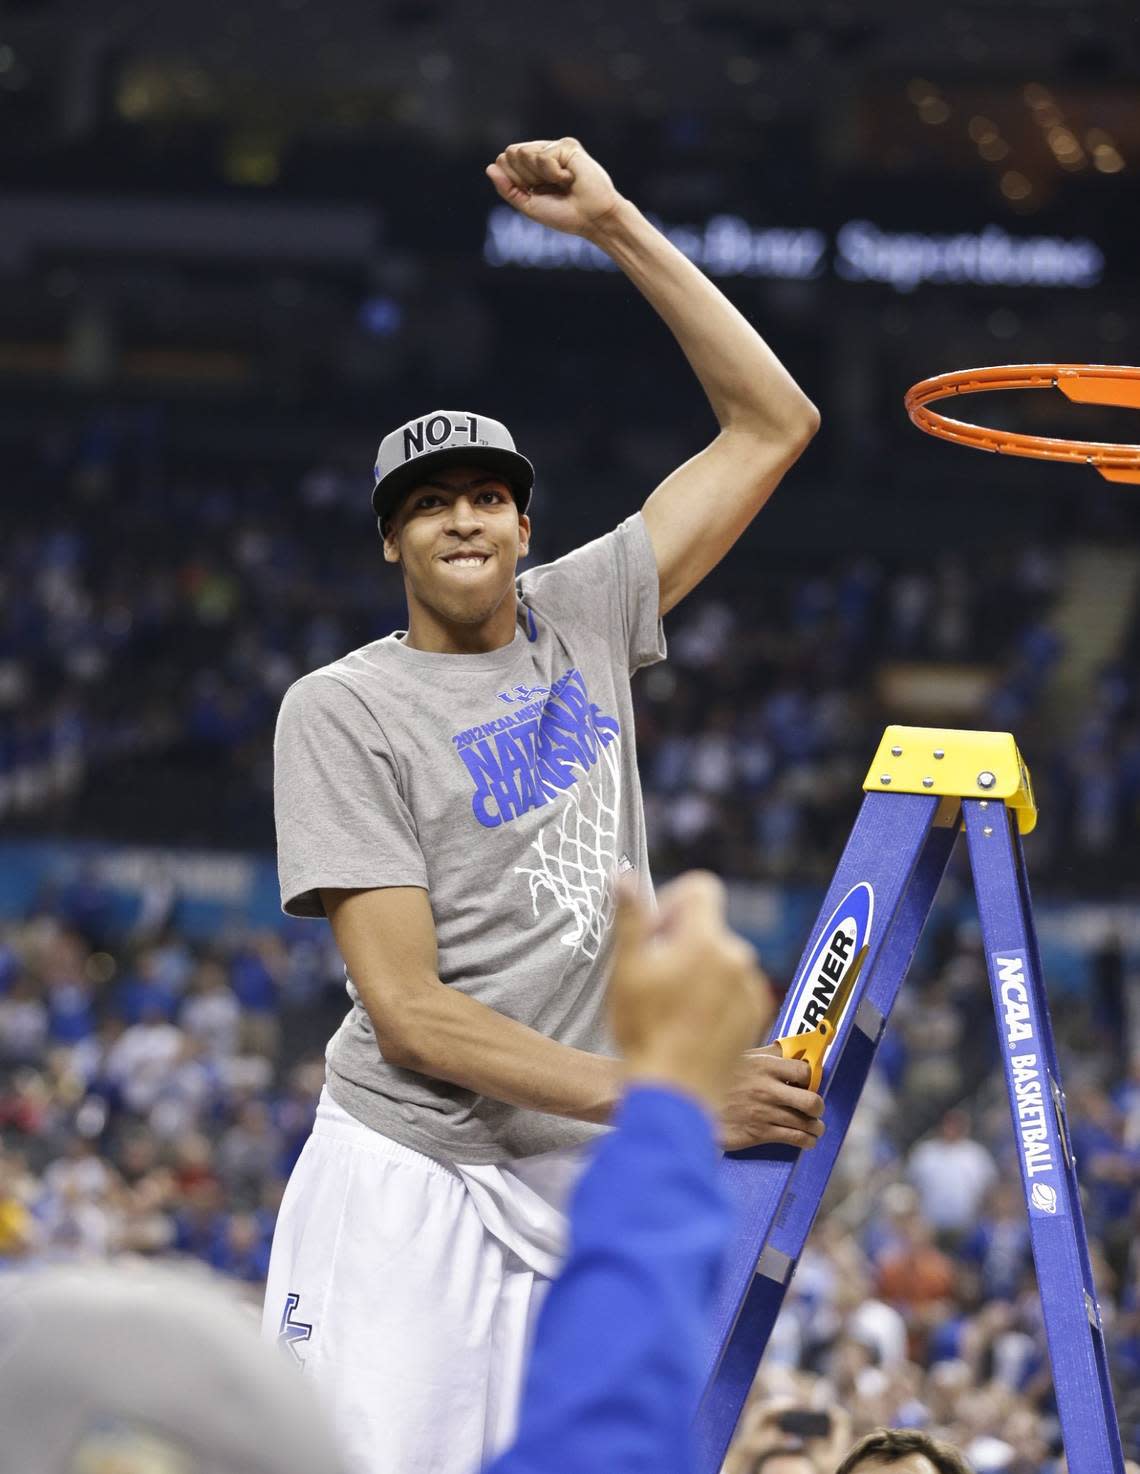 Kentucky star Anthony Davis (23) celebrated after the Wildcats beat Kansas 67-59 in the 2012 NCAA Tournament Championship Game.